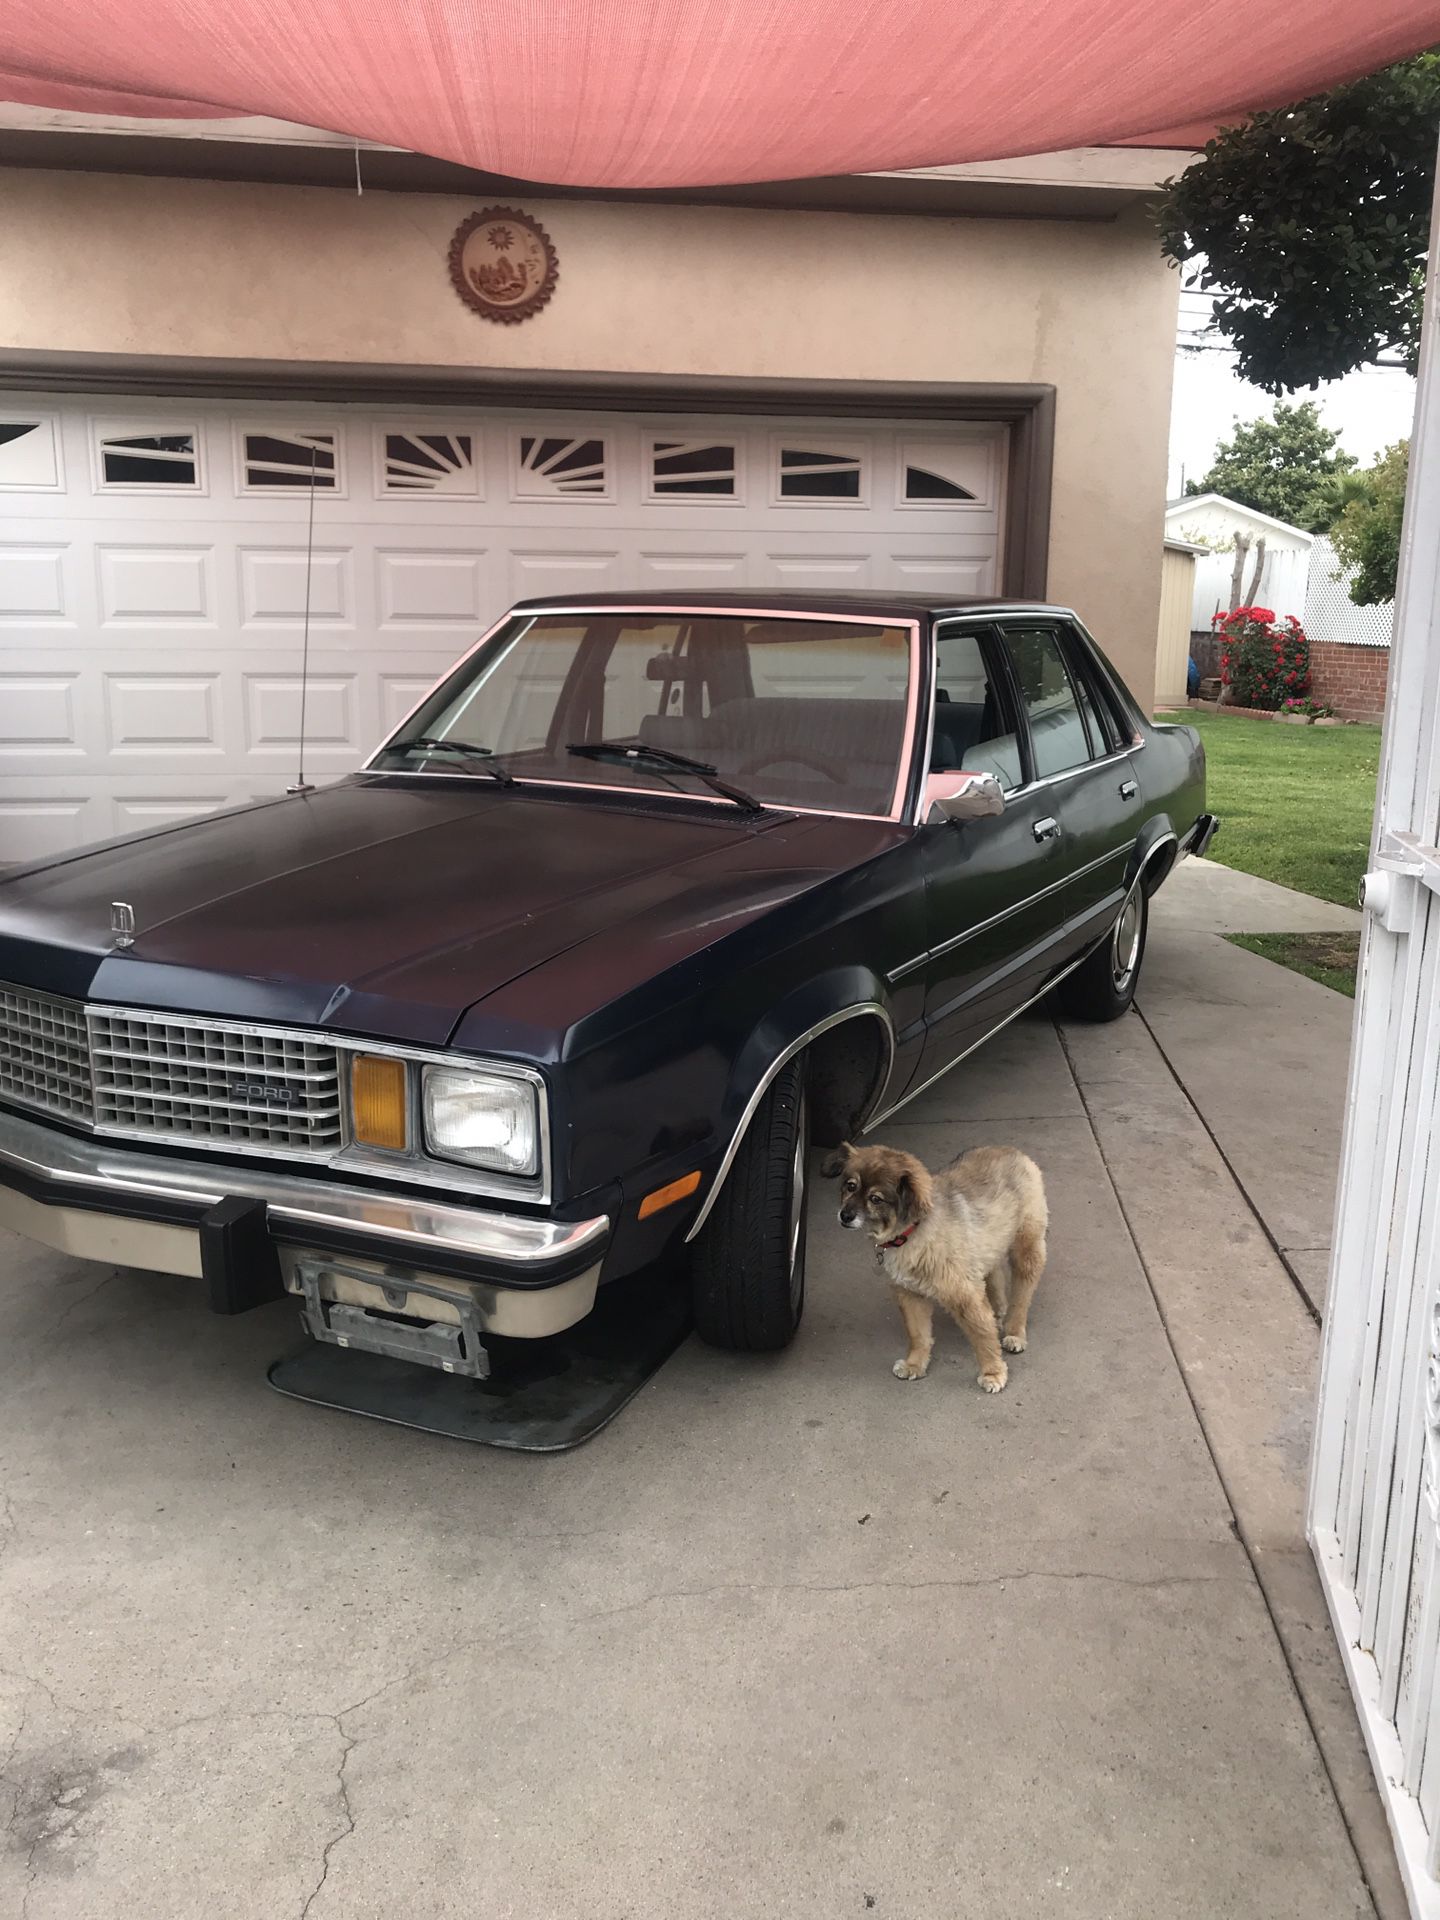 Photo 1979 Ford Fairmont One Owner 35000 Original Miles This Ones Very Clean Car Drives Great No Rust Clean